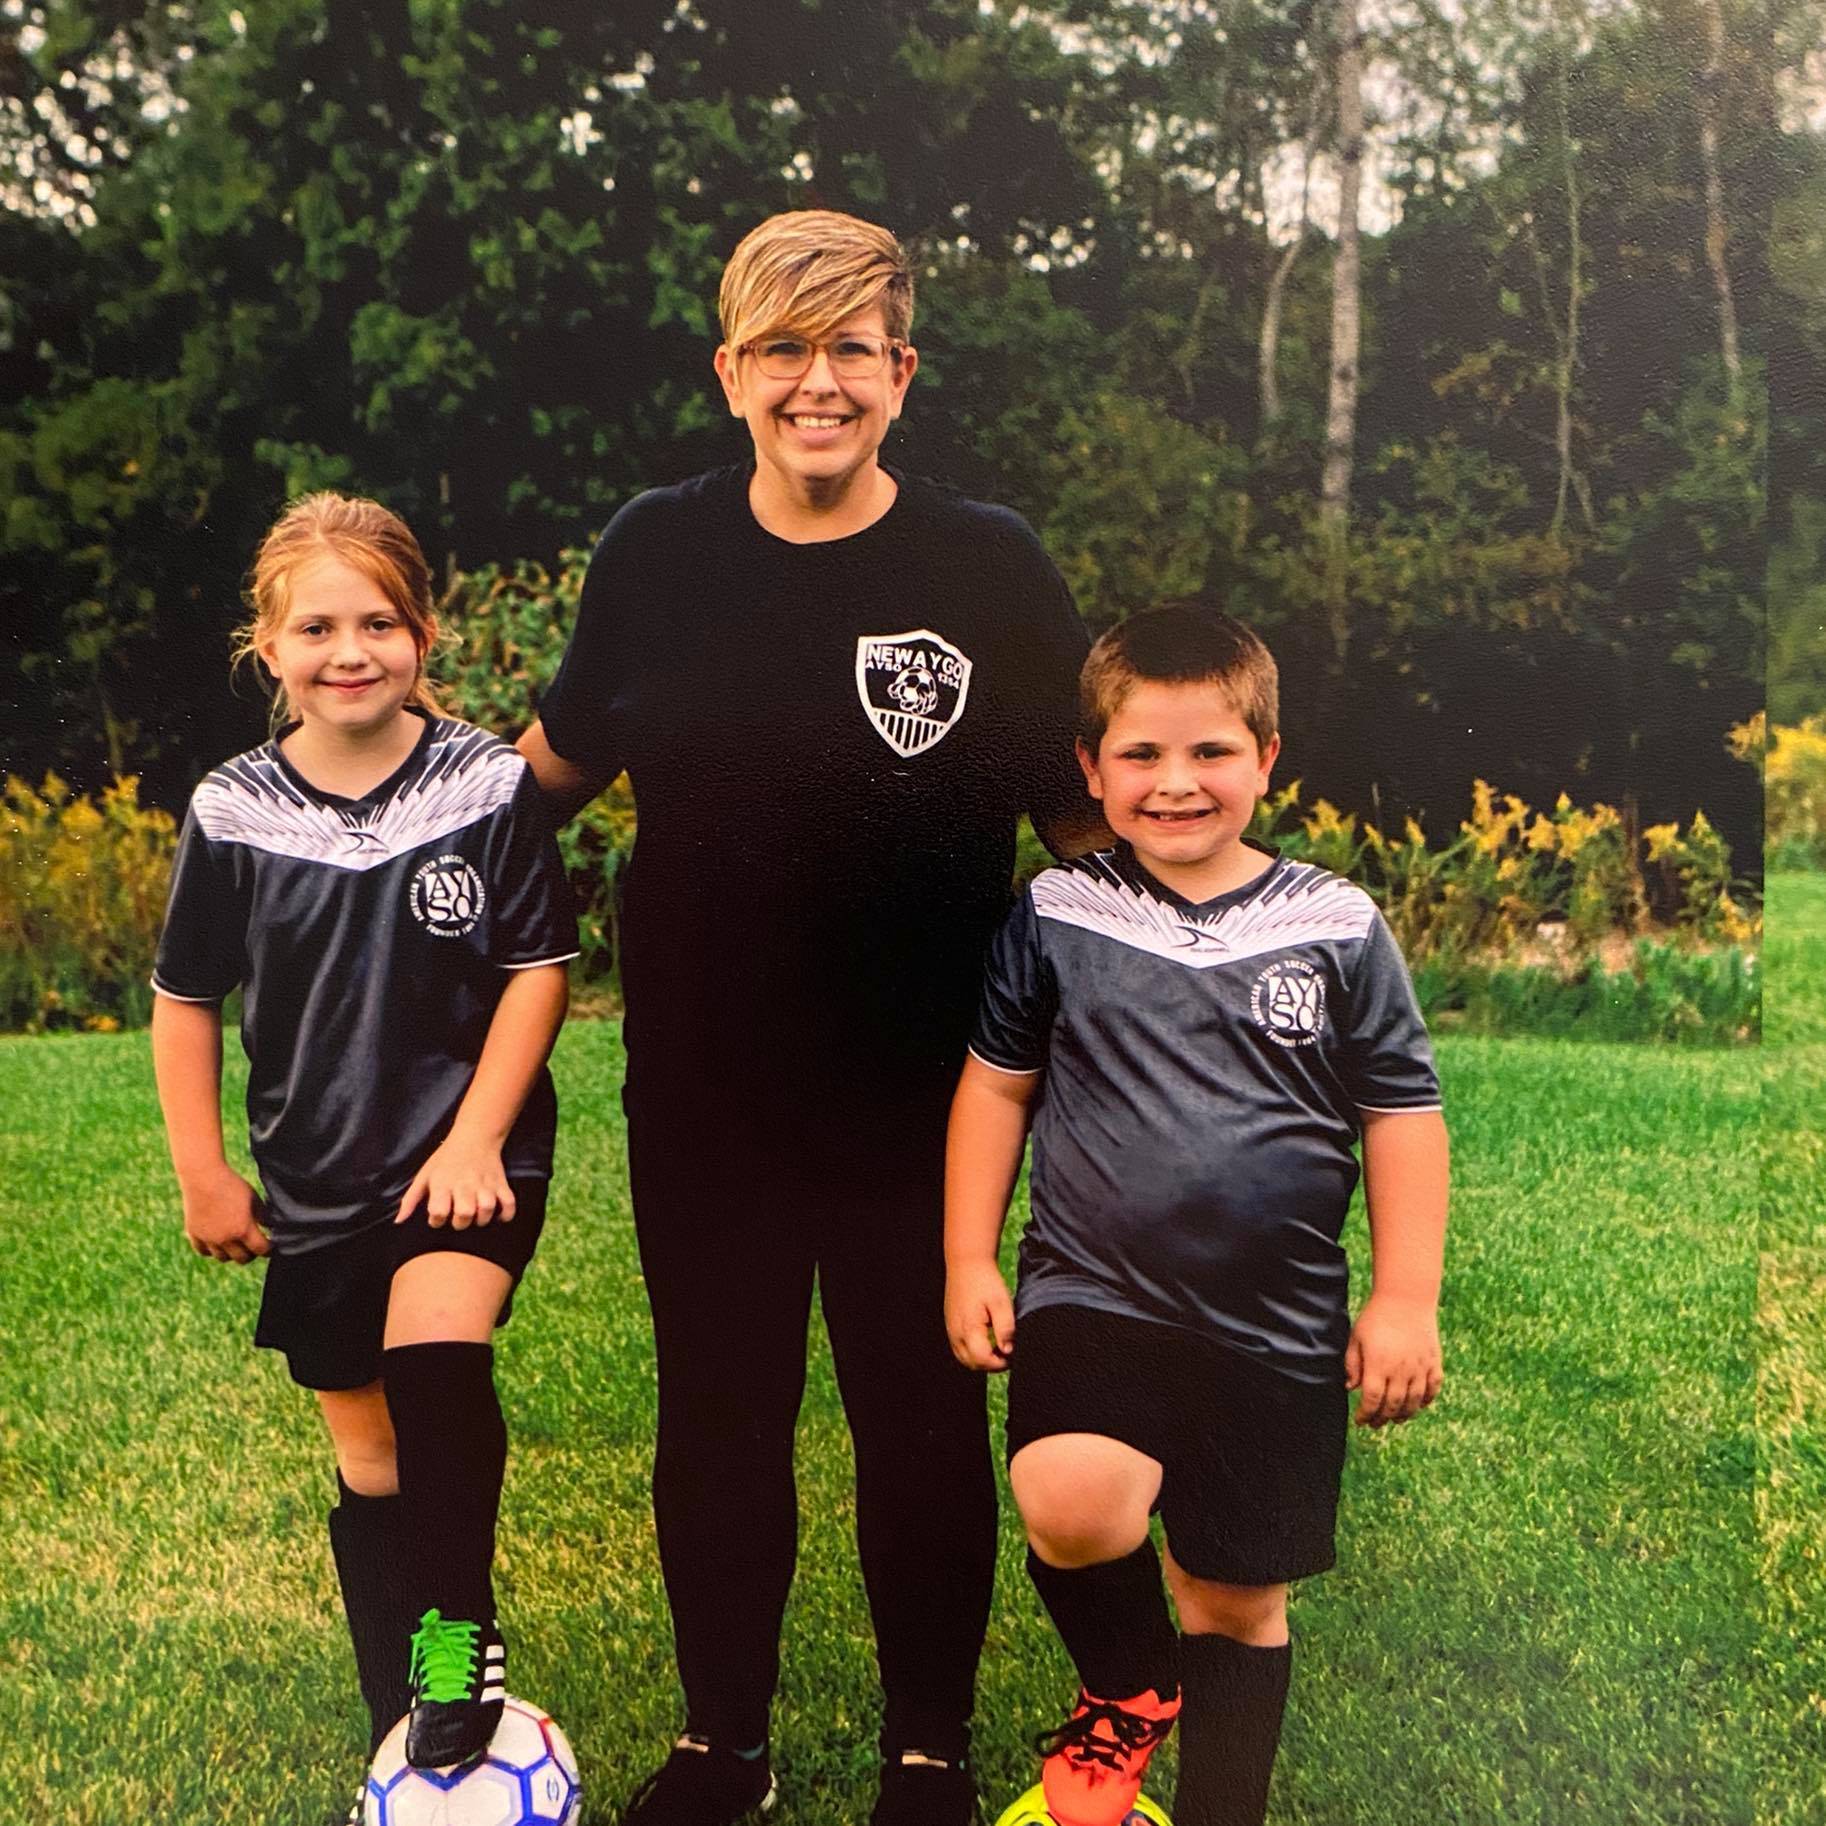 Erica Herwig standing with her two children in their soccer jerseys